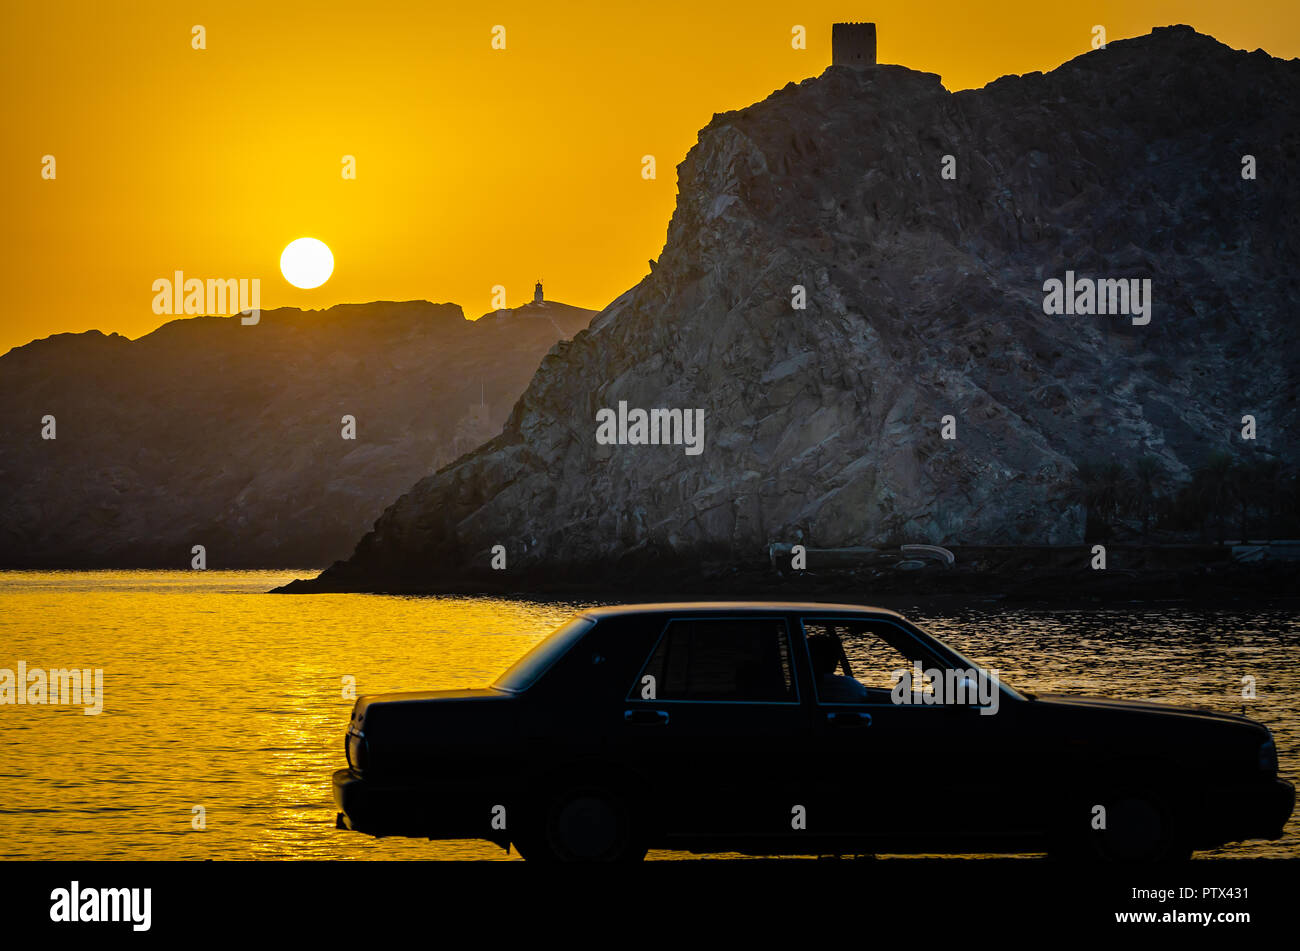 Golden Hour. Sun rising over mountains. Silhouette of a man in car watching. Stock Photo